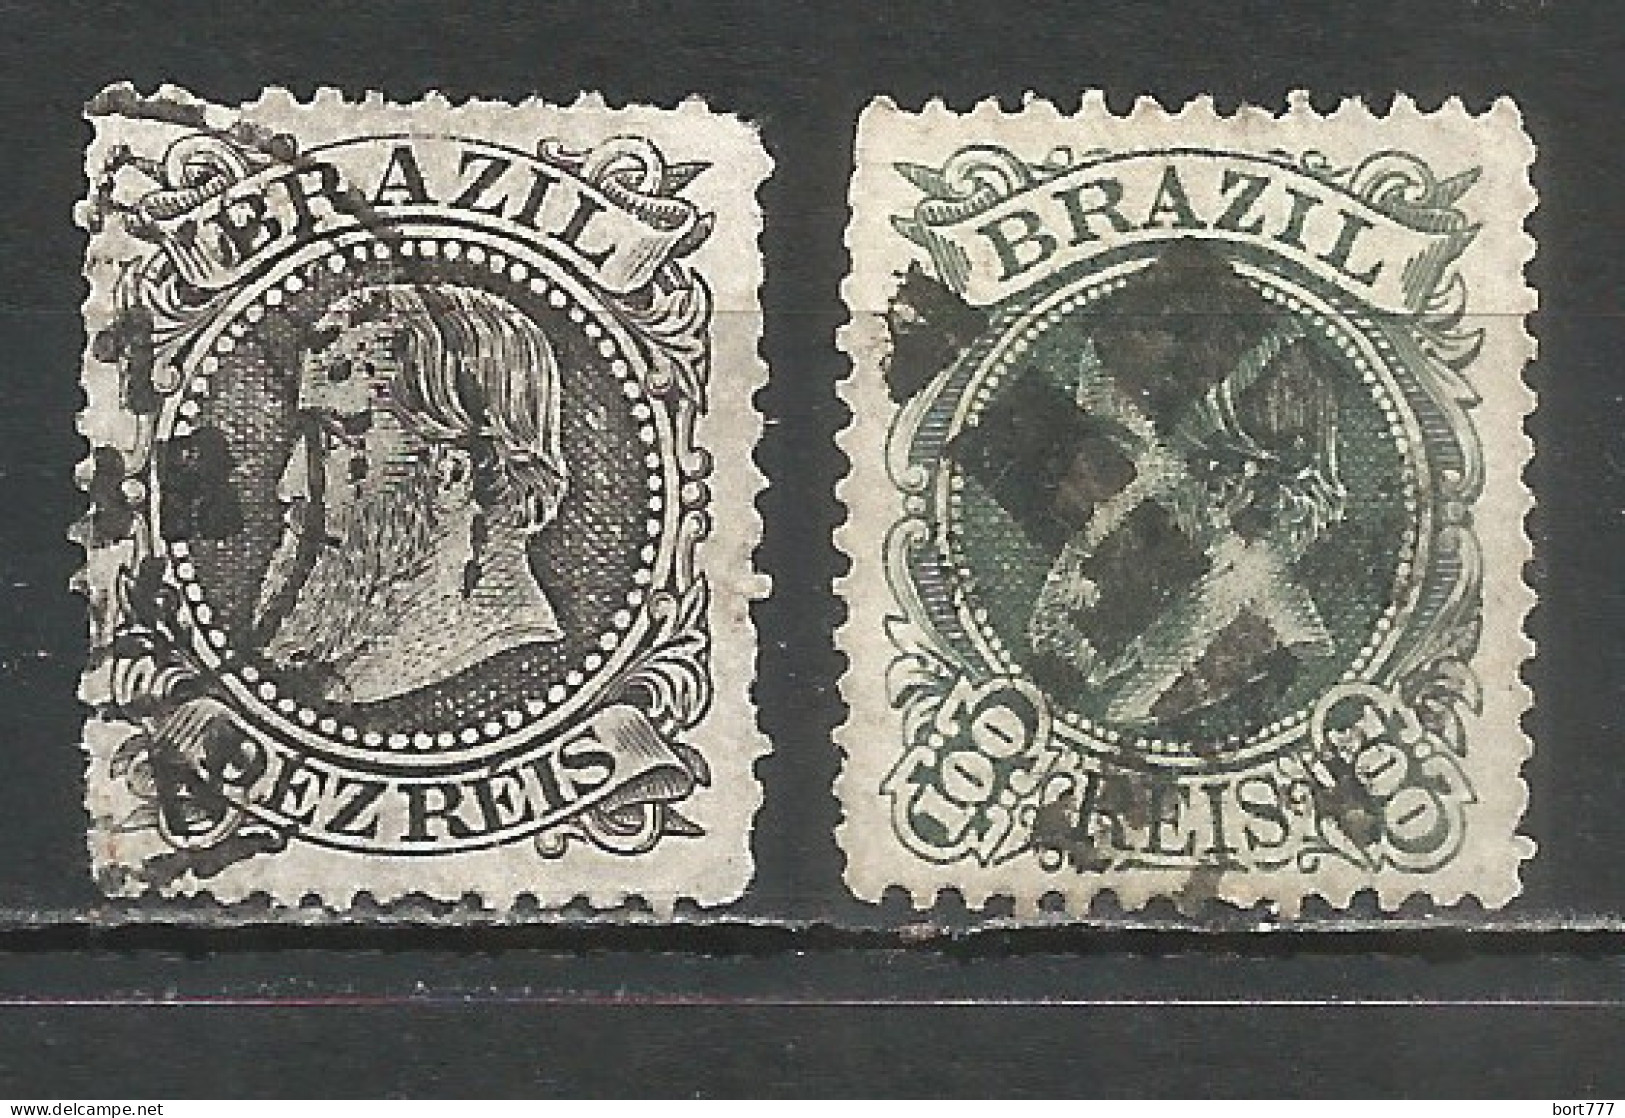 Brazil 1882 Year Nice Used Stamps - Used Stamps